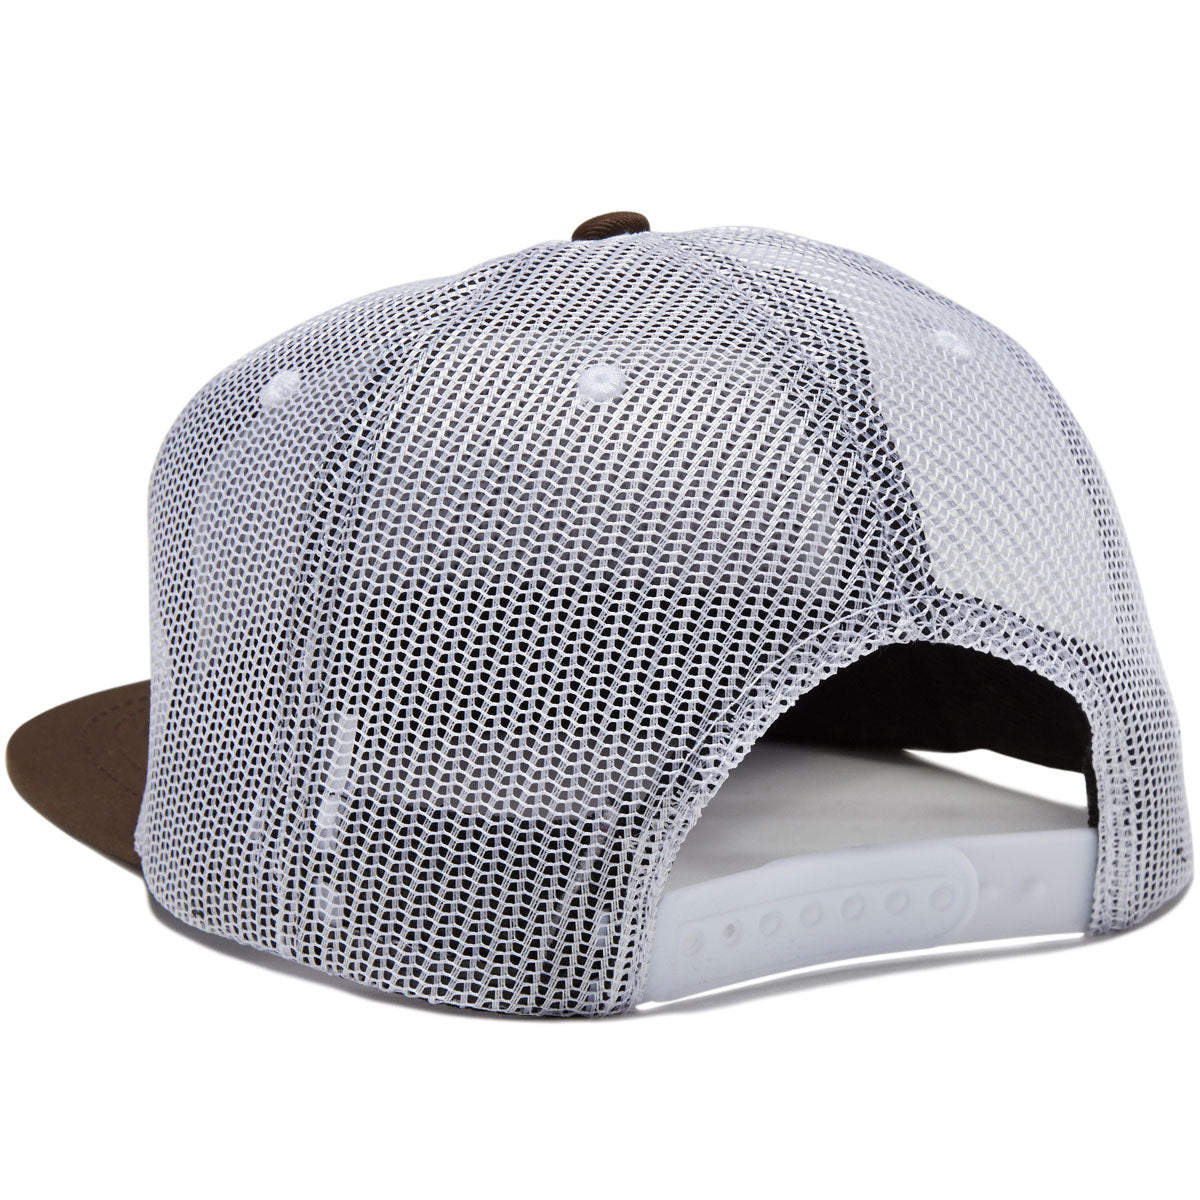 Snot Classic Japan Trucker Hat - Brown image 2